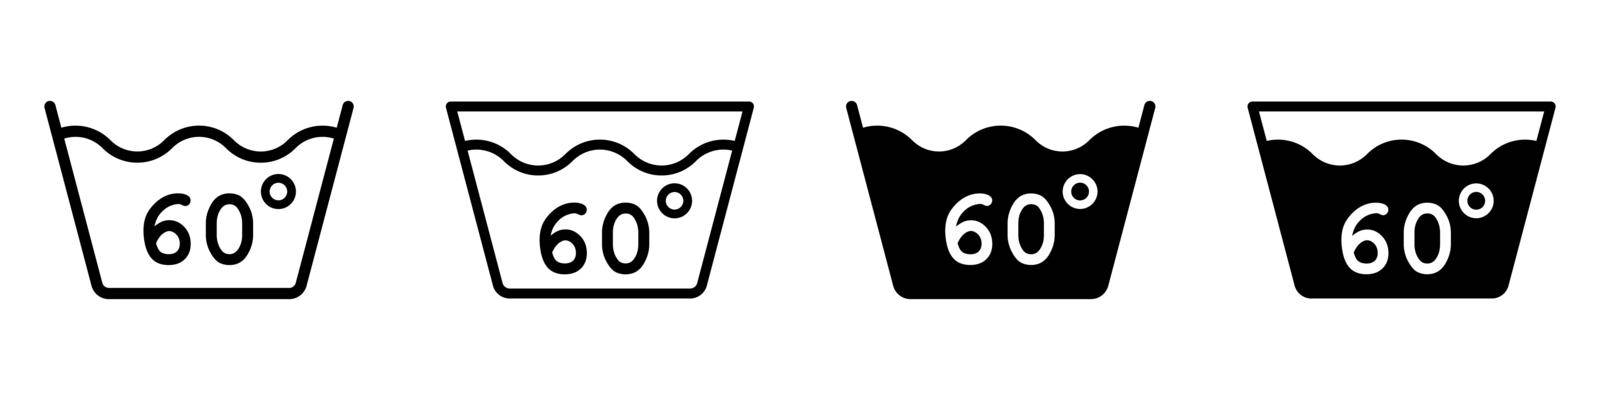 Degrees of water. Wash at a temperature not exceeding 60 degrees. Isolated wash icon. Vector illustration.